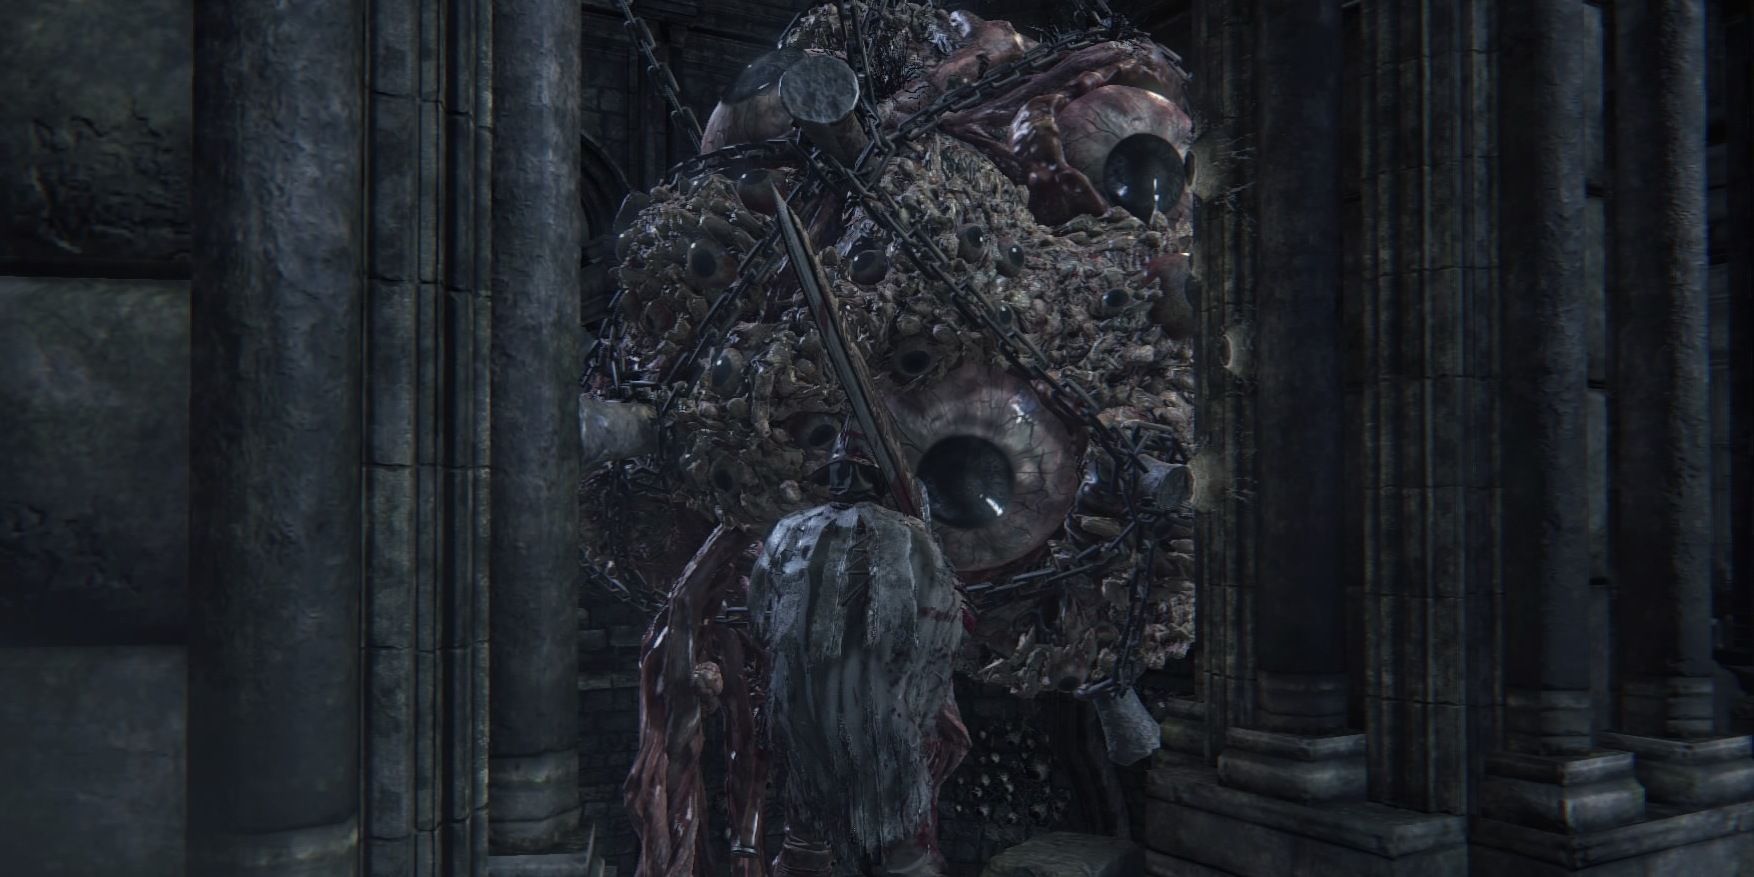 The Hunter faces down the Brain of Mensis in Bloodborne.